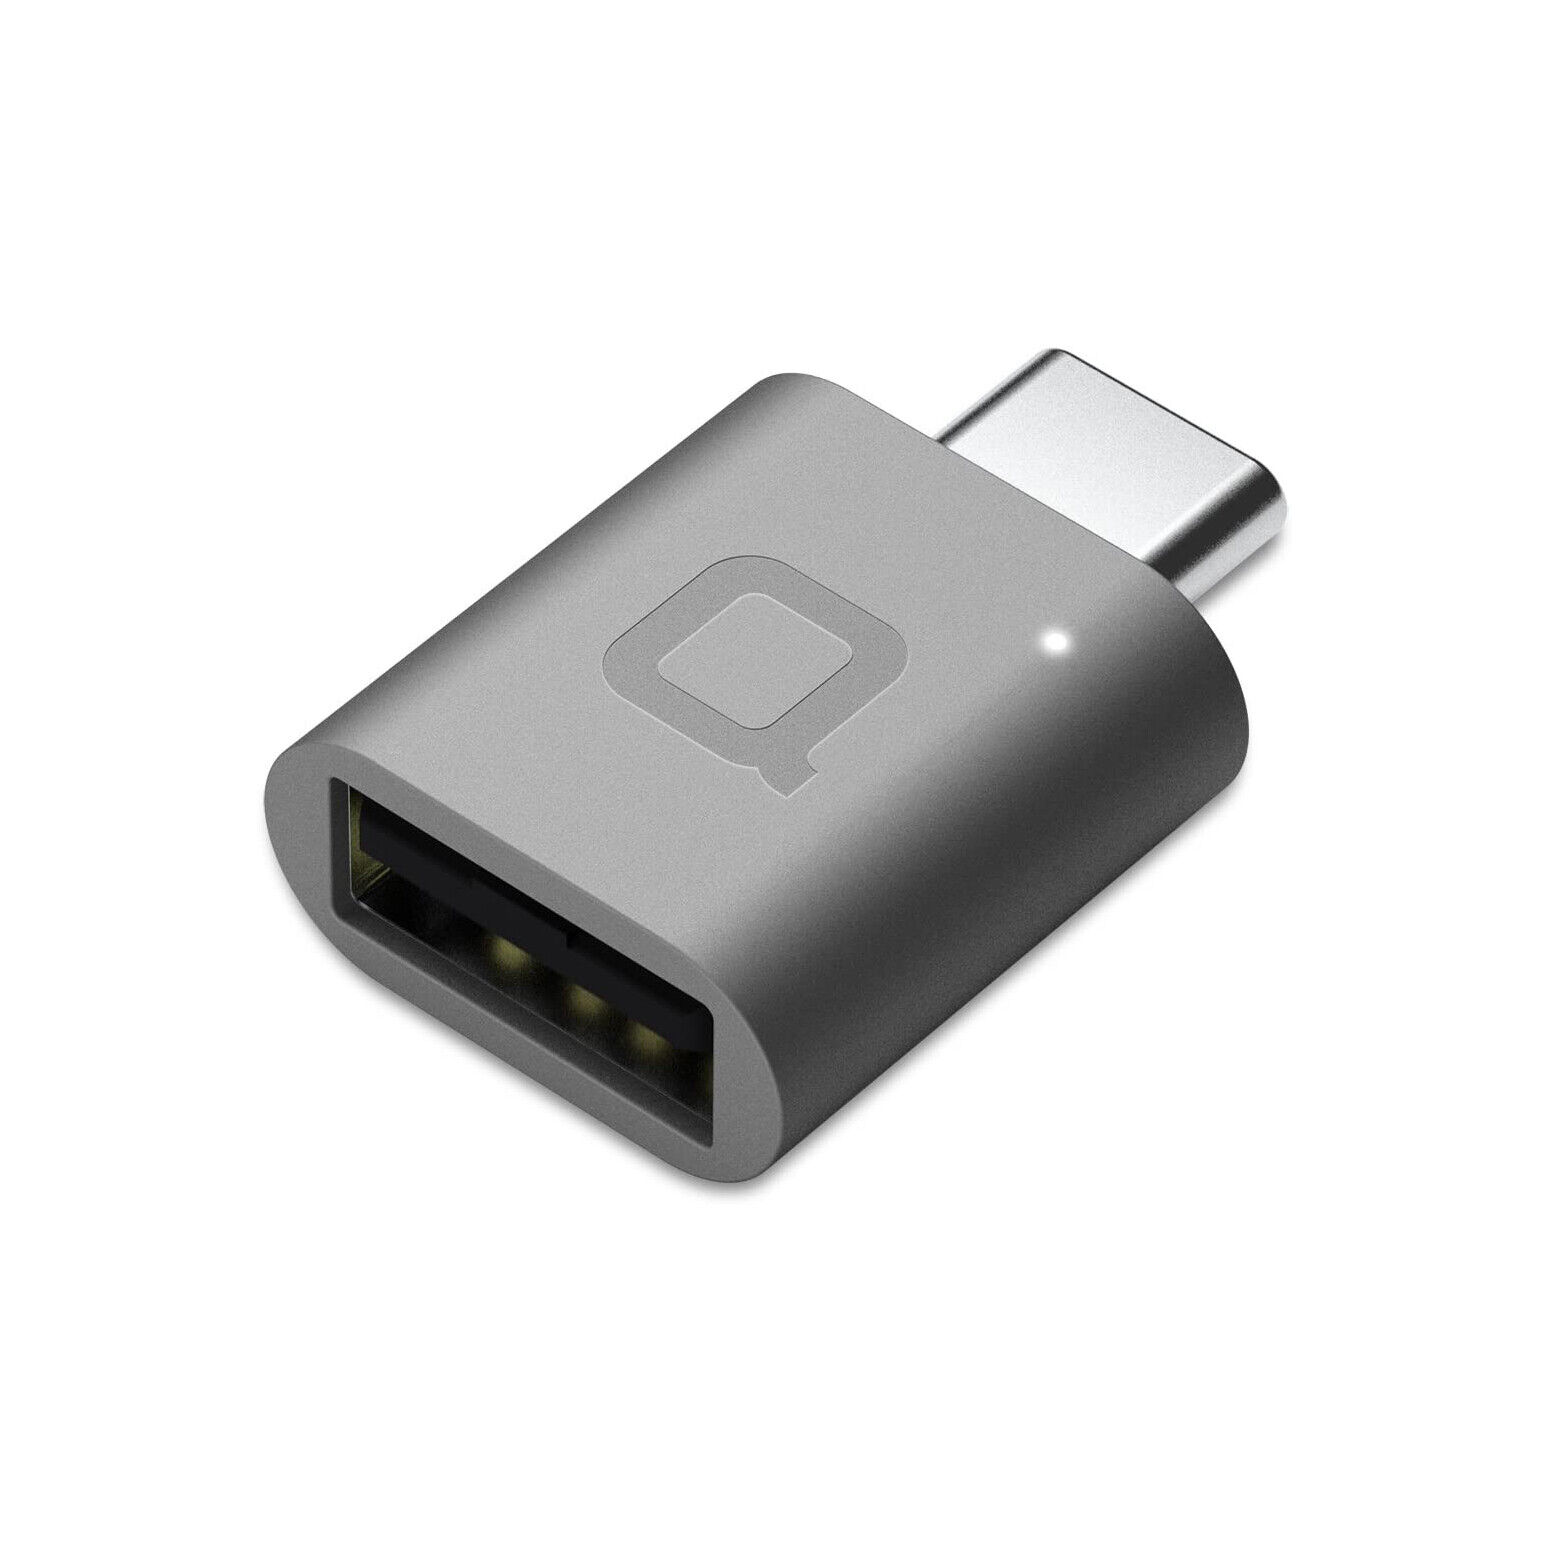 nonda USB Type-C to USB Adapter for MacBook Pro2019/Air/iPad Pro 2020 - Space